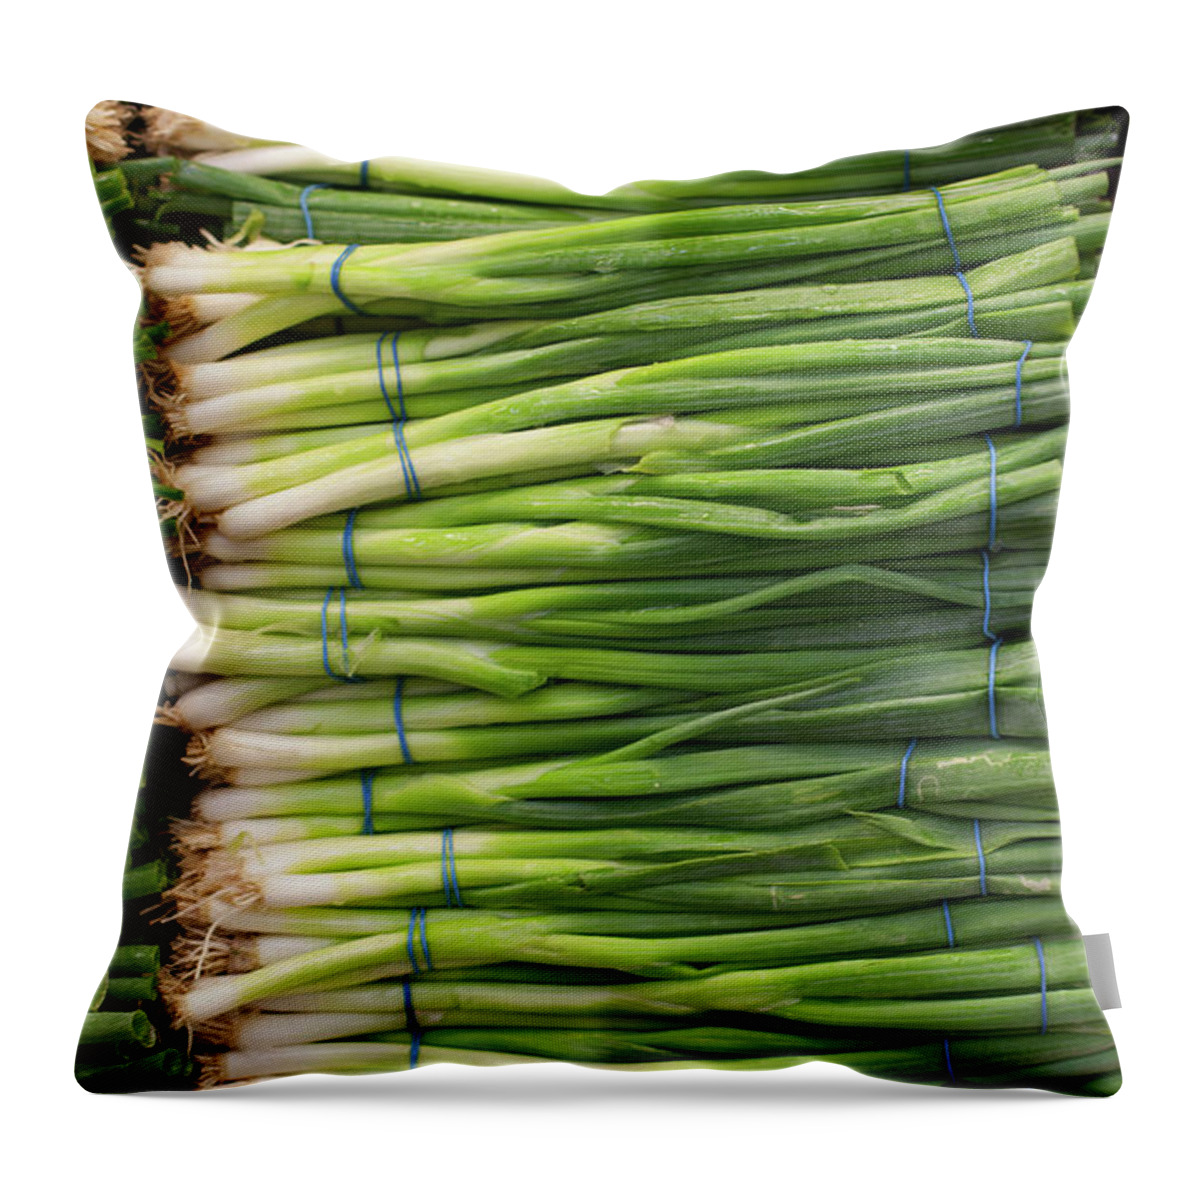 Large Group Of Objects Throw Pillow featuring the photograph Green Onions by Tuan Tran